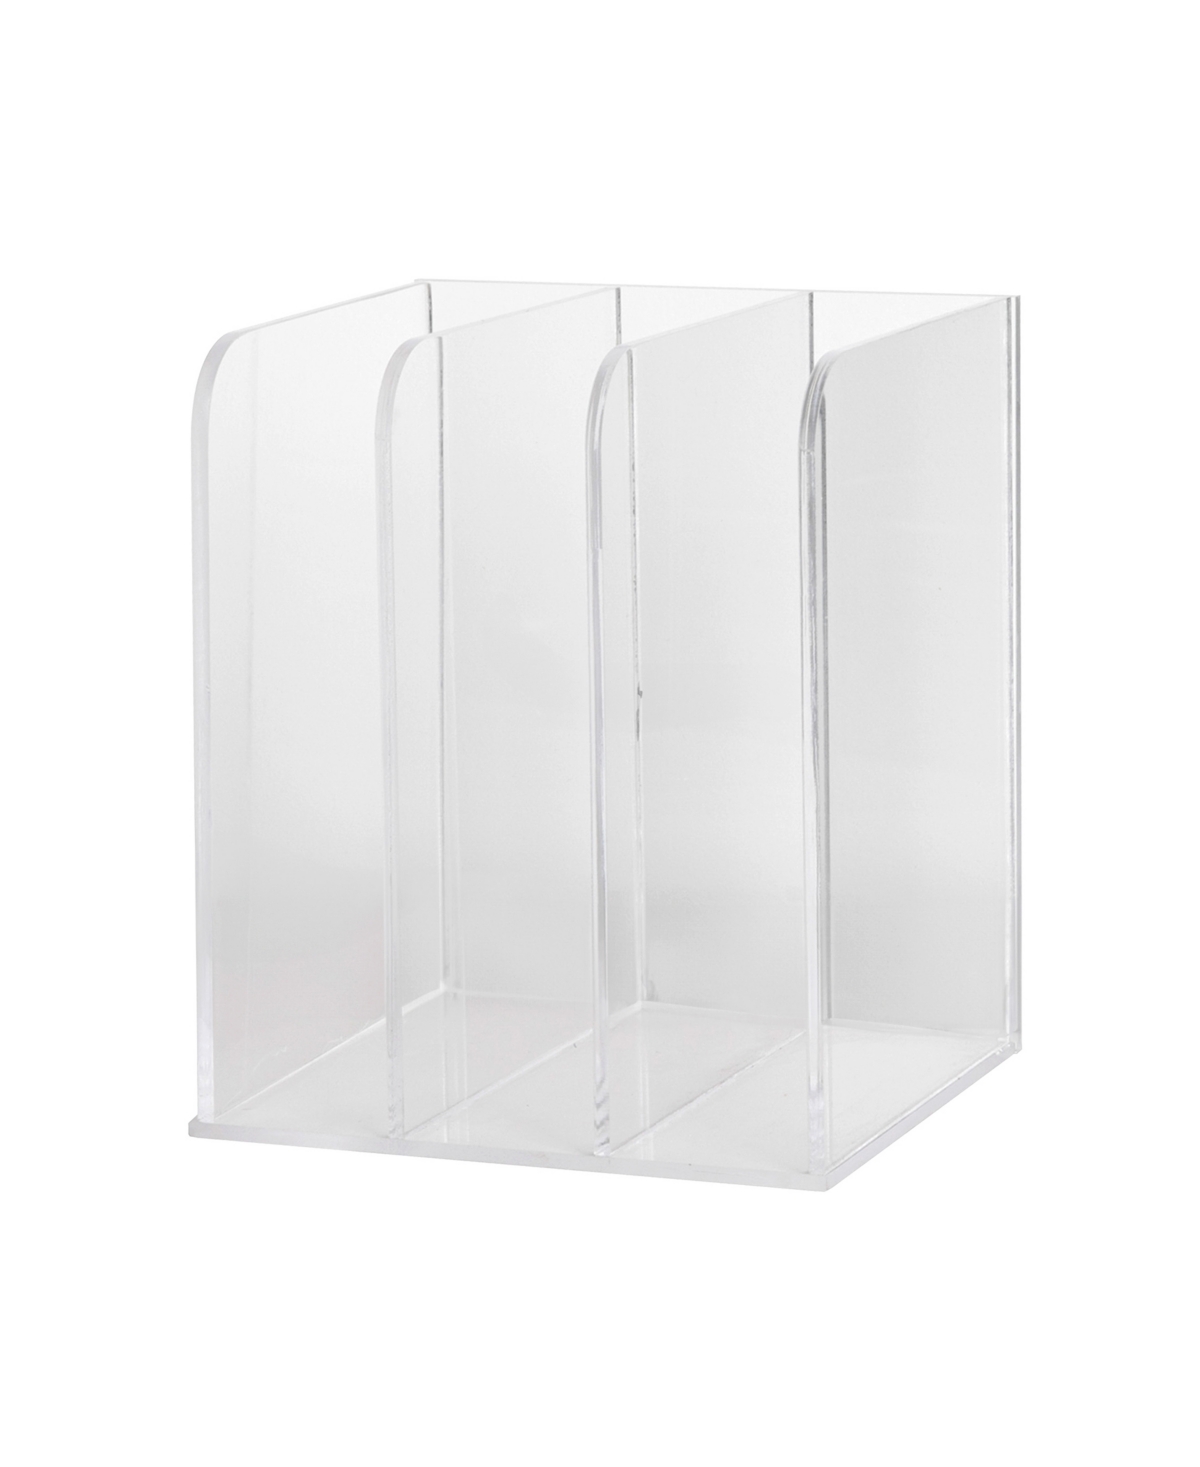 Brody Acrylic 3 Section File Holder Office Desktop Organizer, 8.5" x 6.5" - Clear